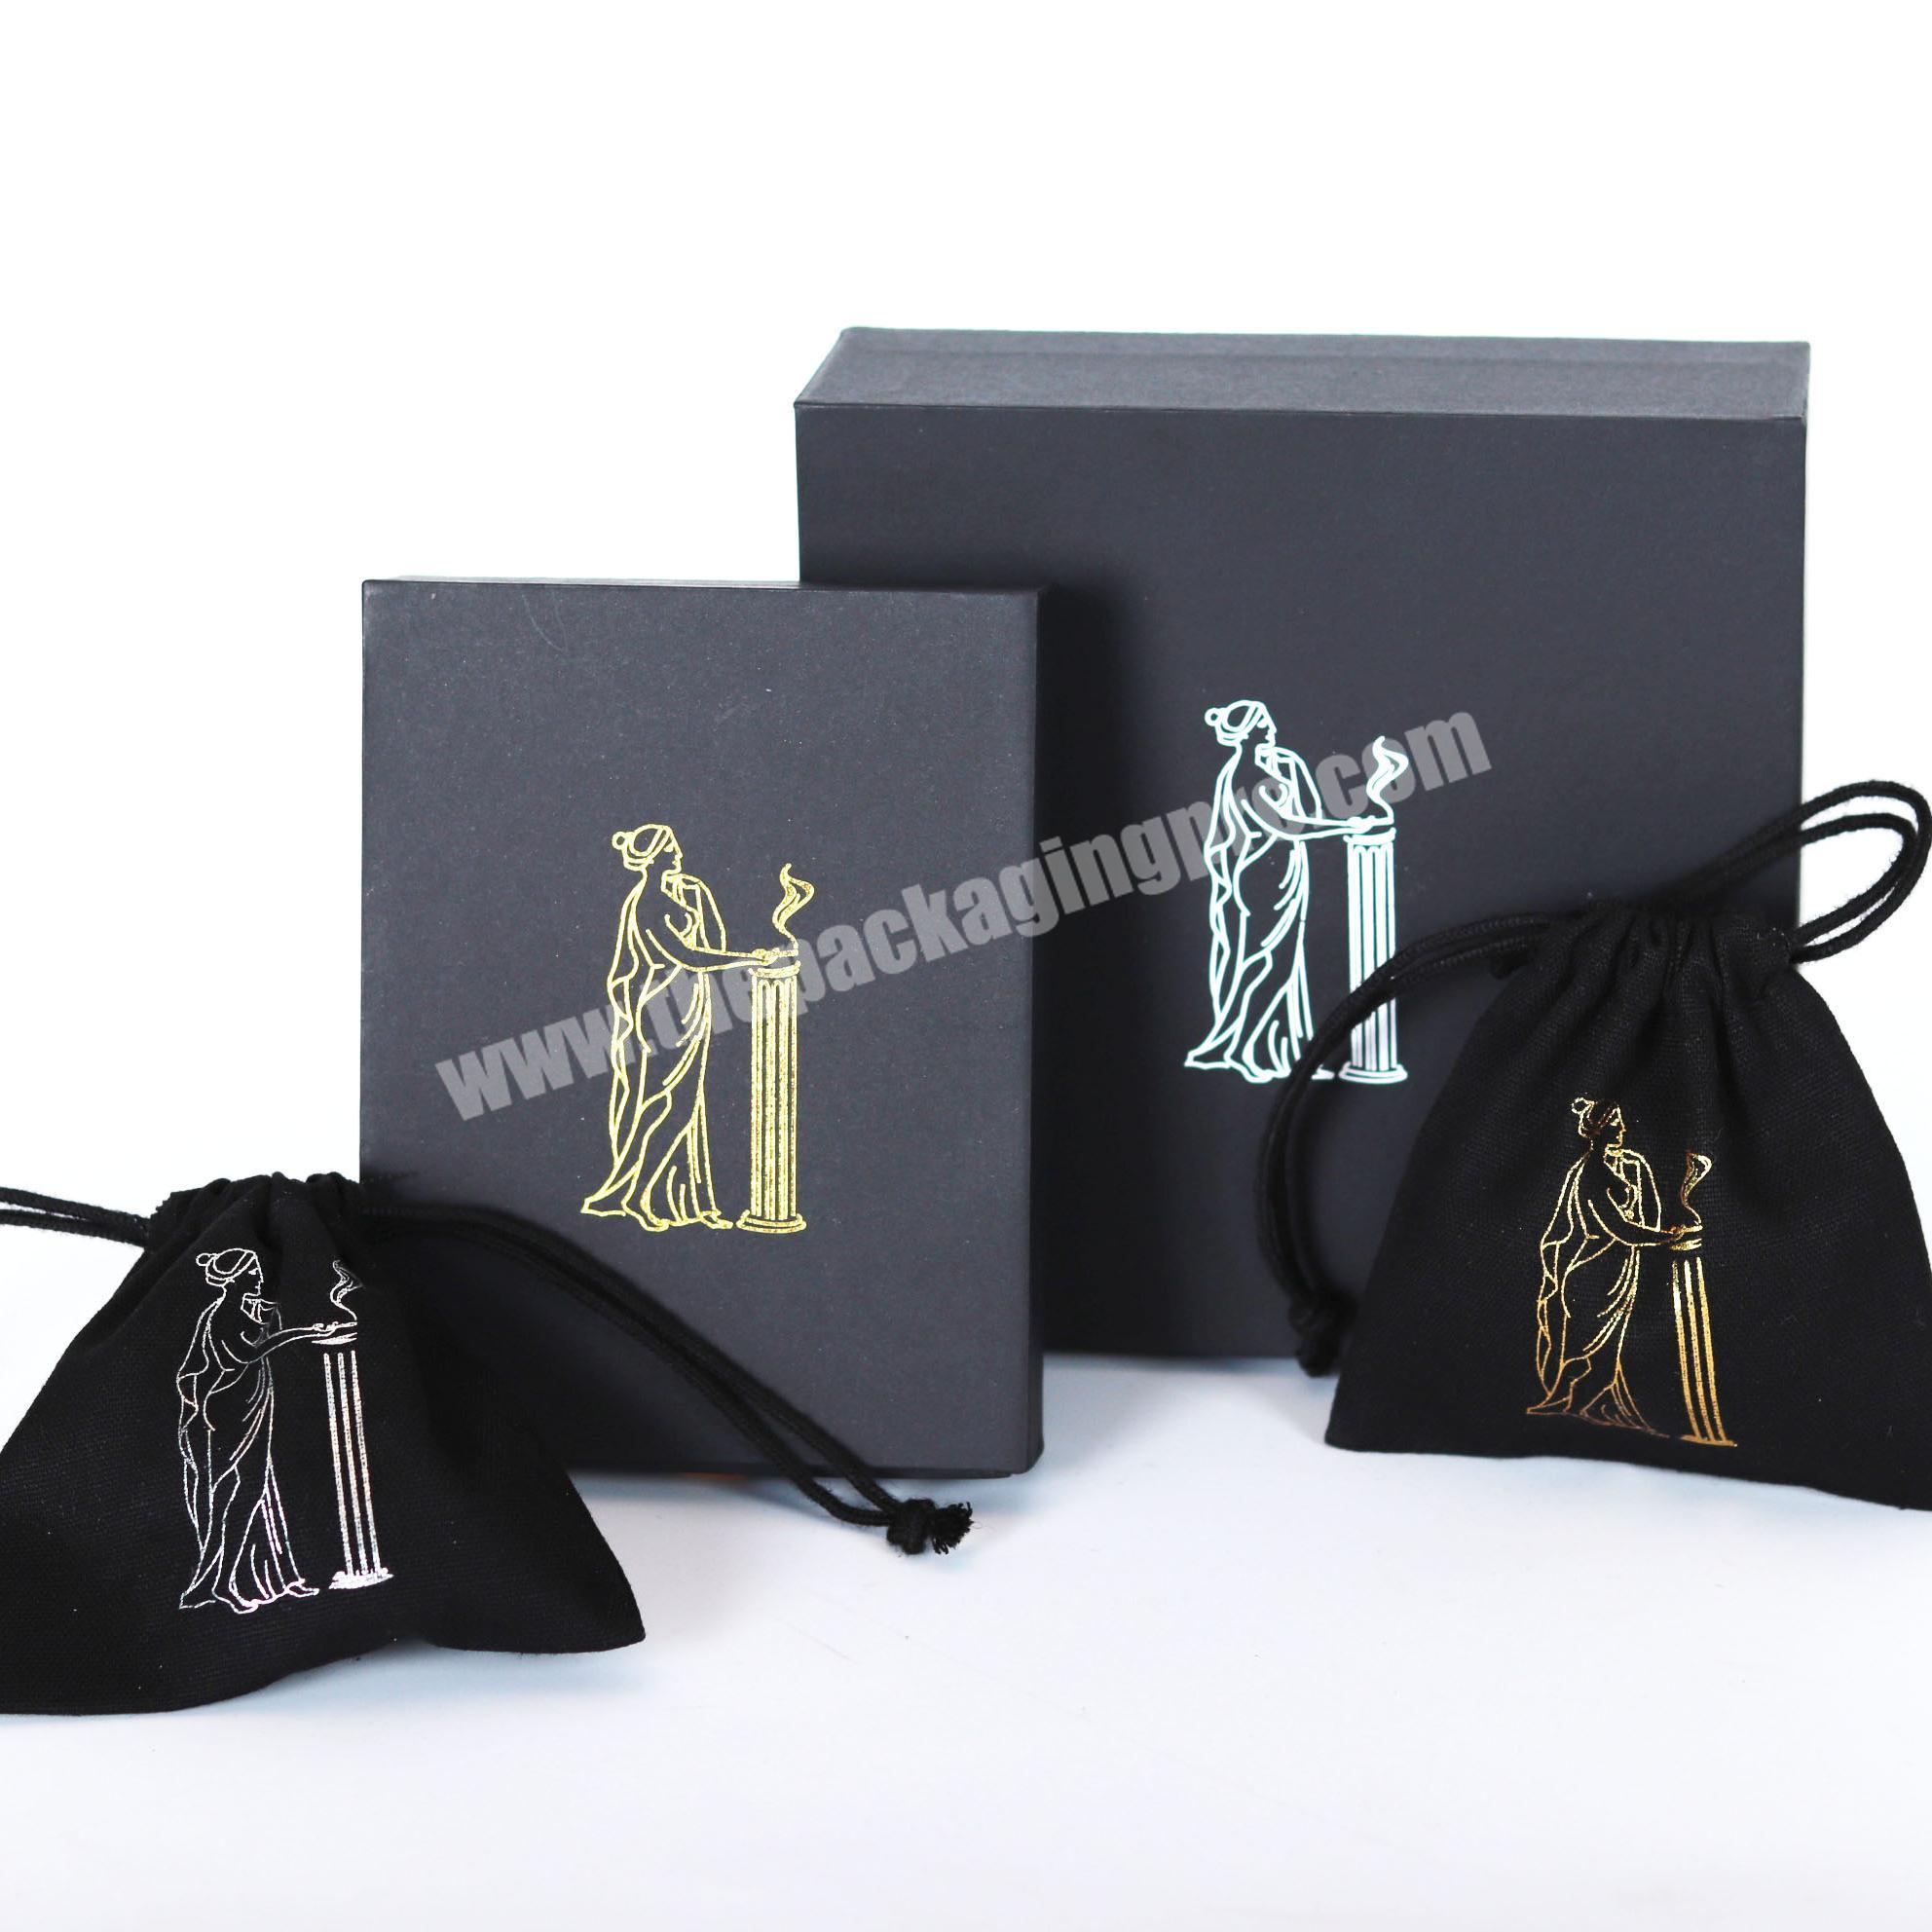 China Manufacturer Luxury gift box for jewellery packaging on Valentine's Day